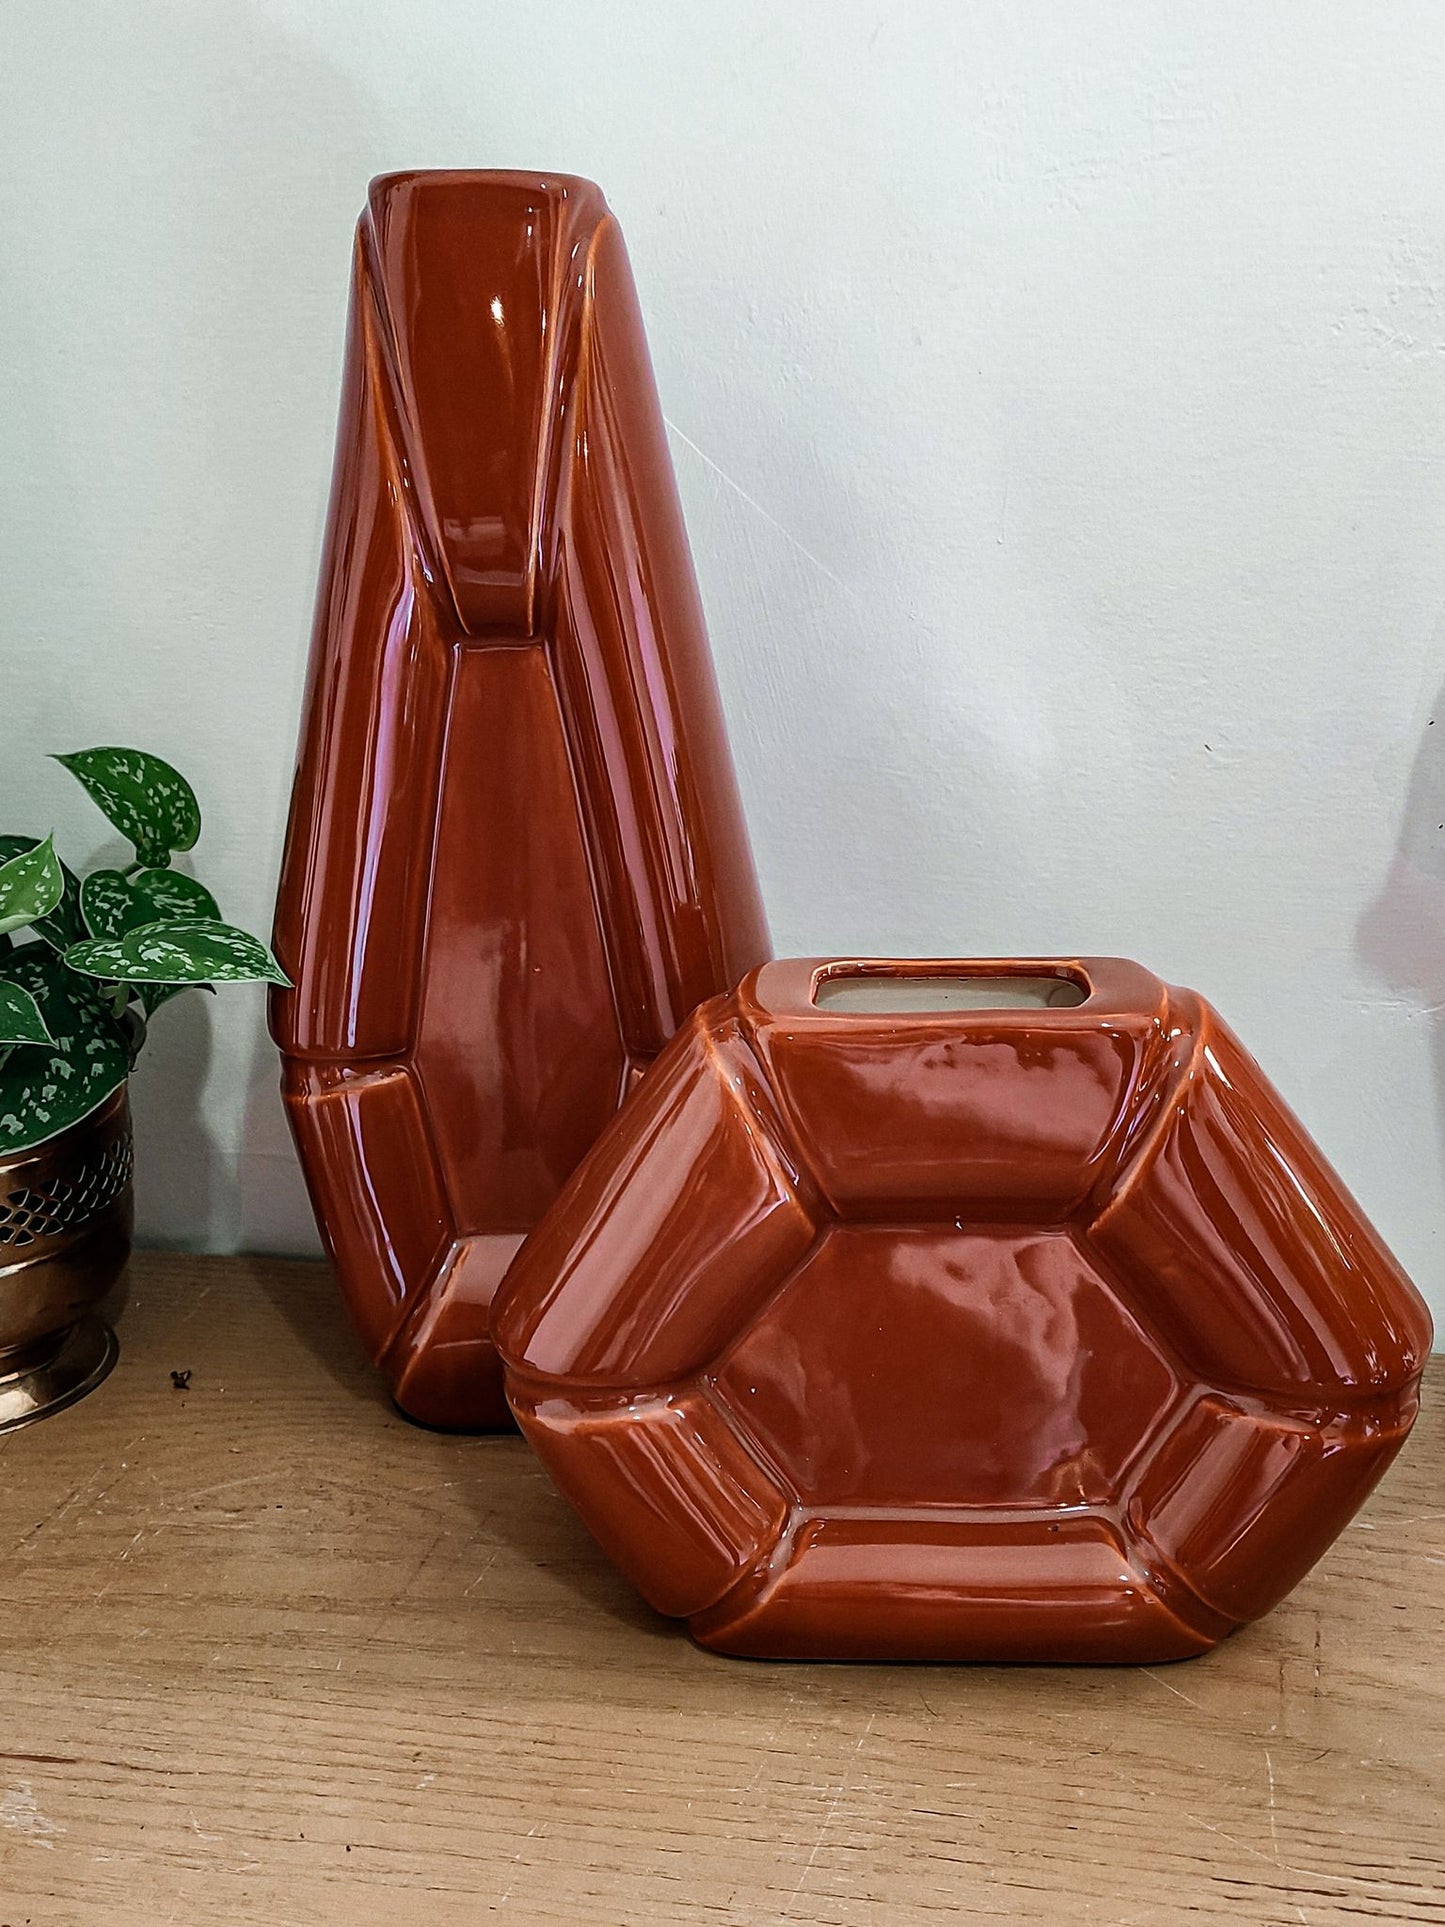 Unique Brown vase (tall one only)